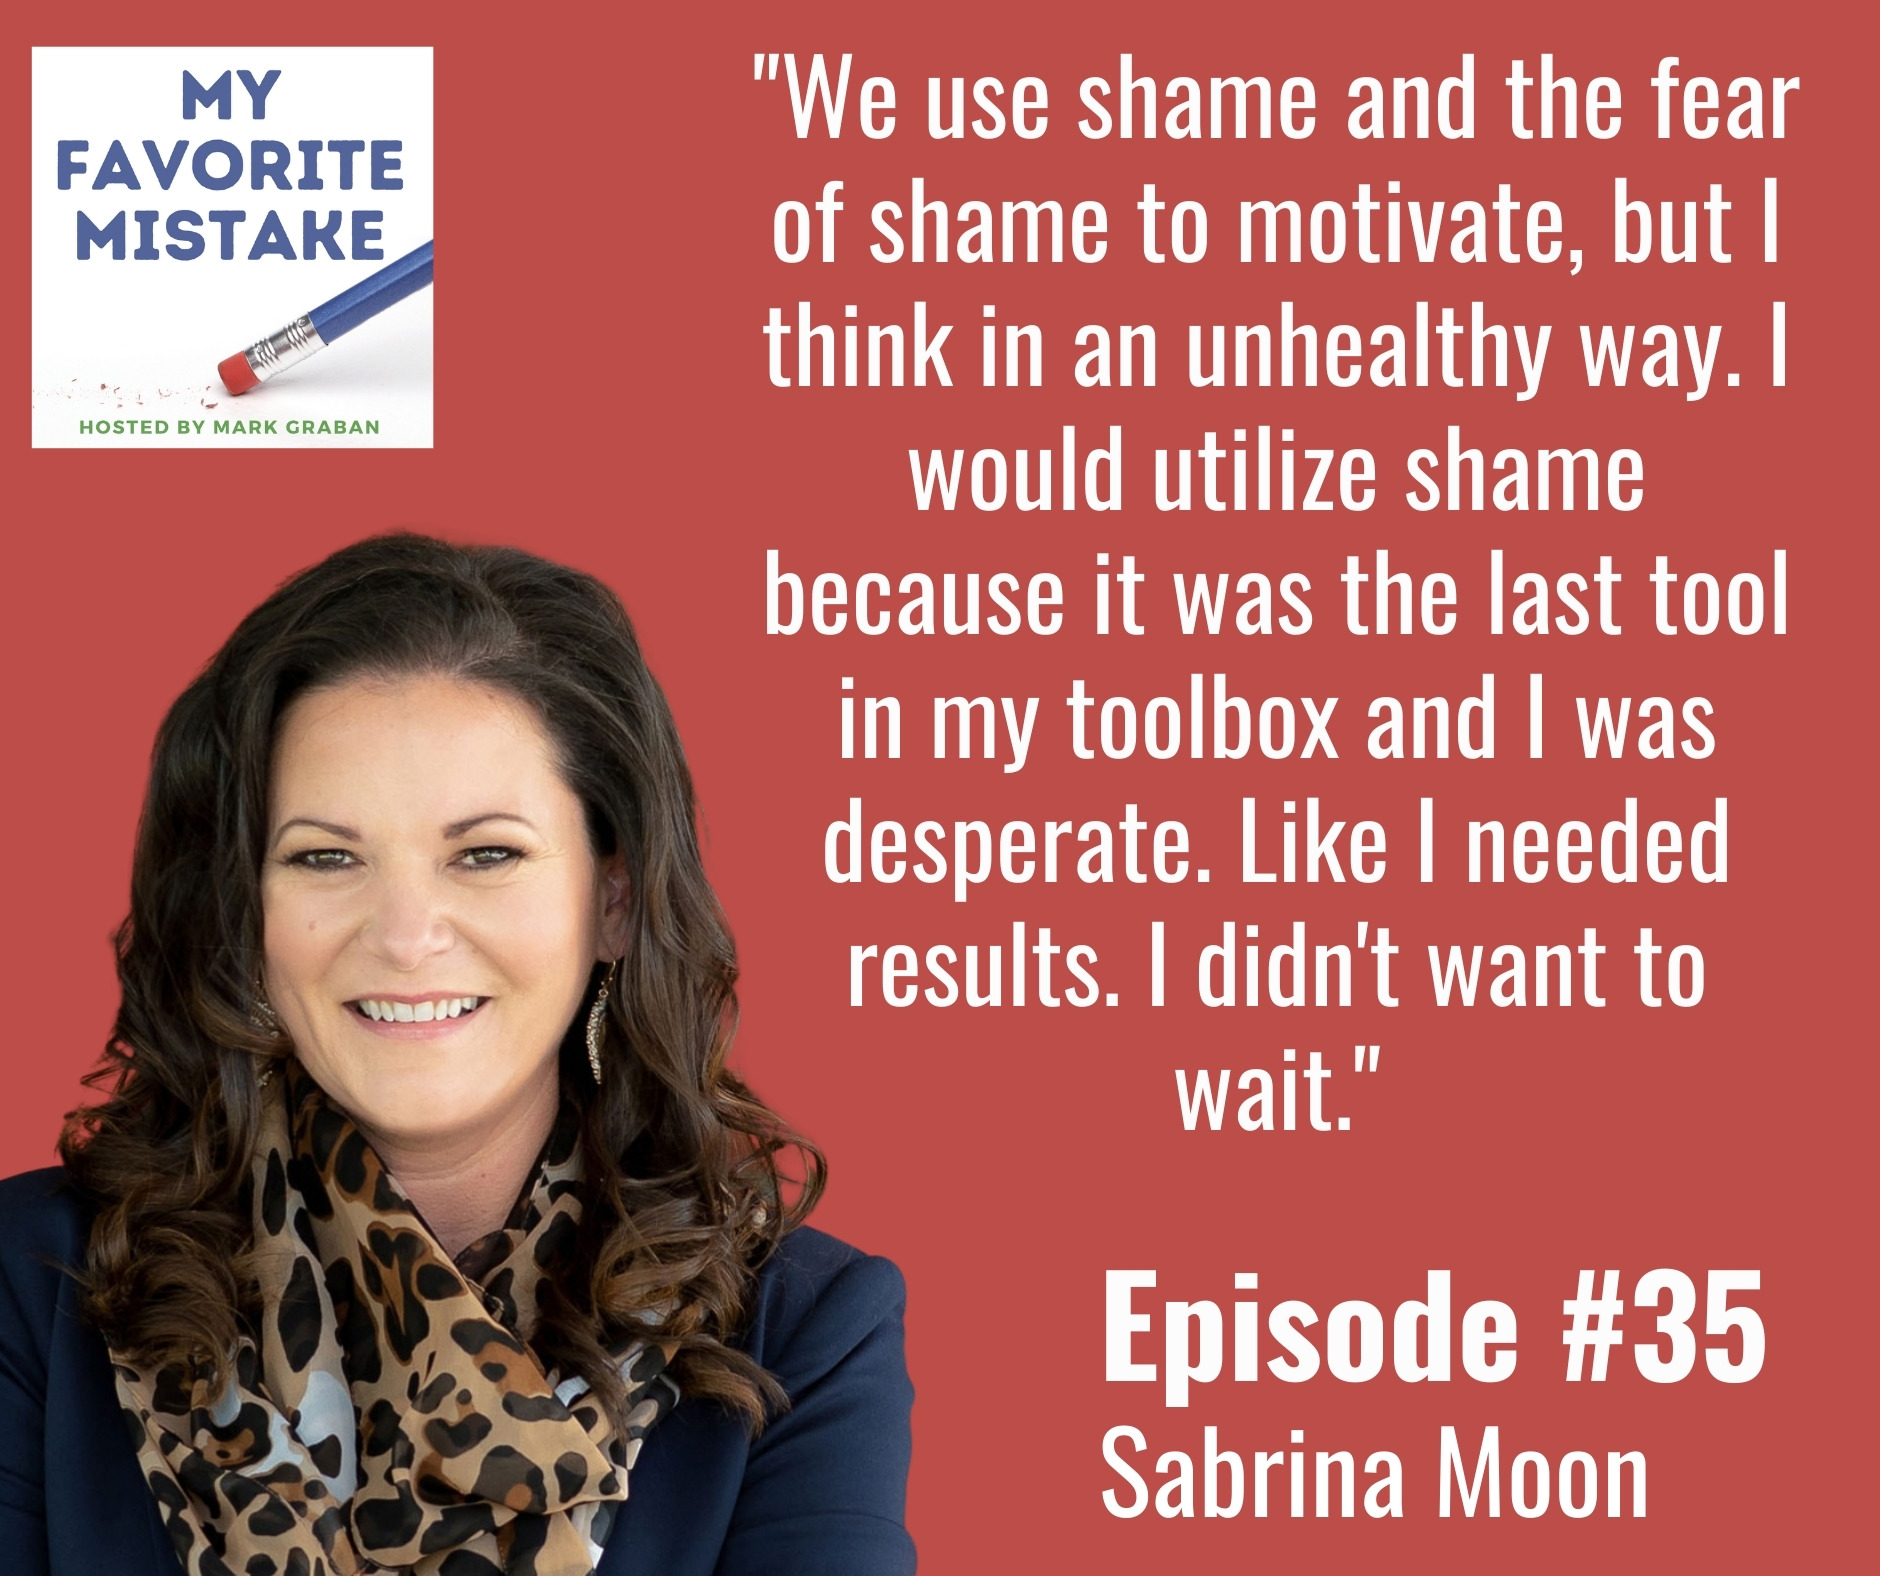 "We use shame and the fear of shame to motivate, but I think in an unhealthy way. I would utilize shame because it was the last tool in my toolbox and I was desperate. Like I needed results. I didn't want to wait."